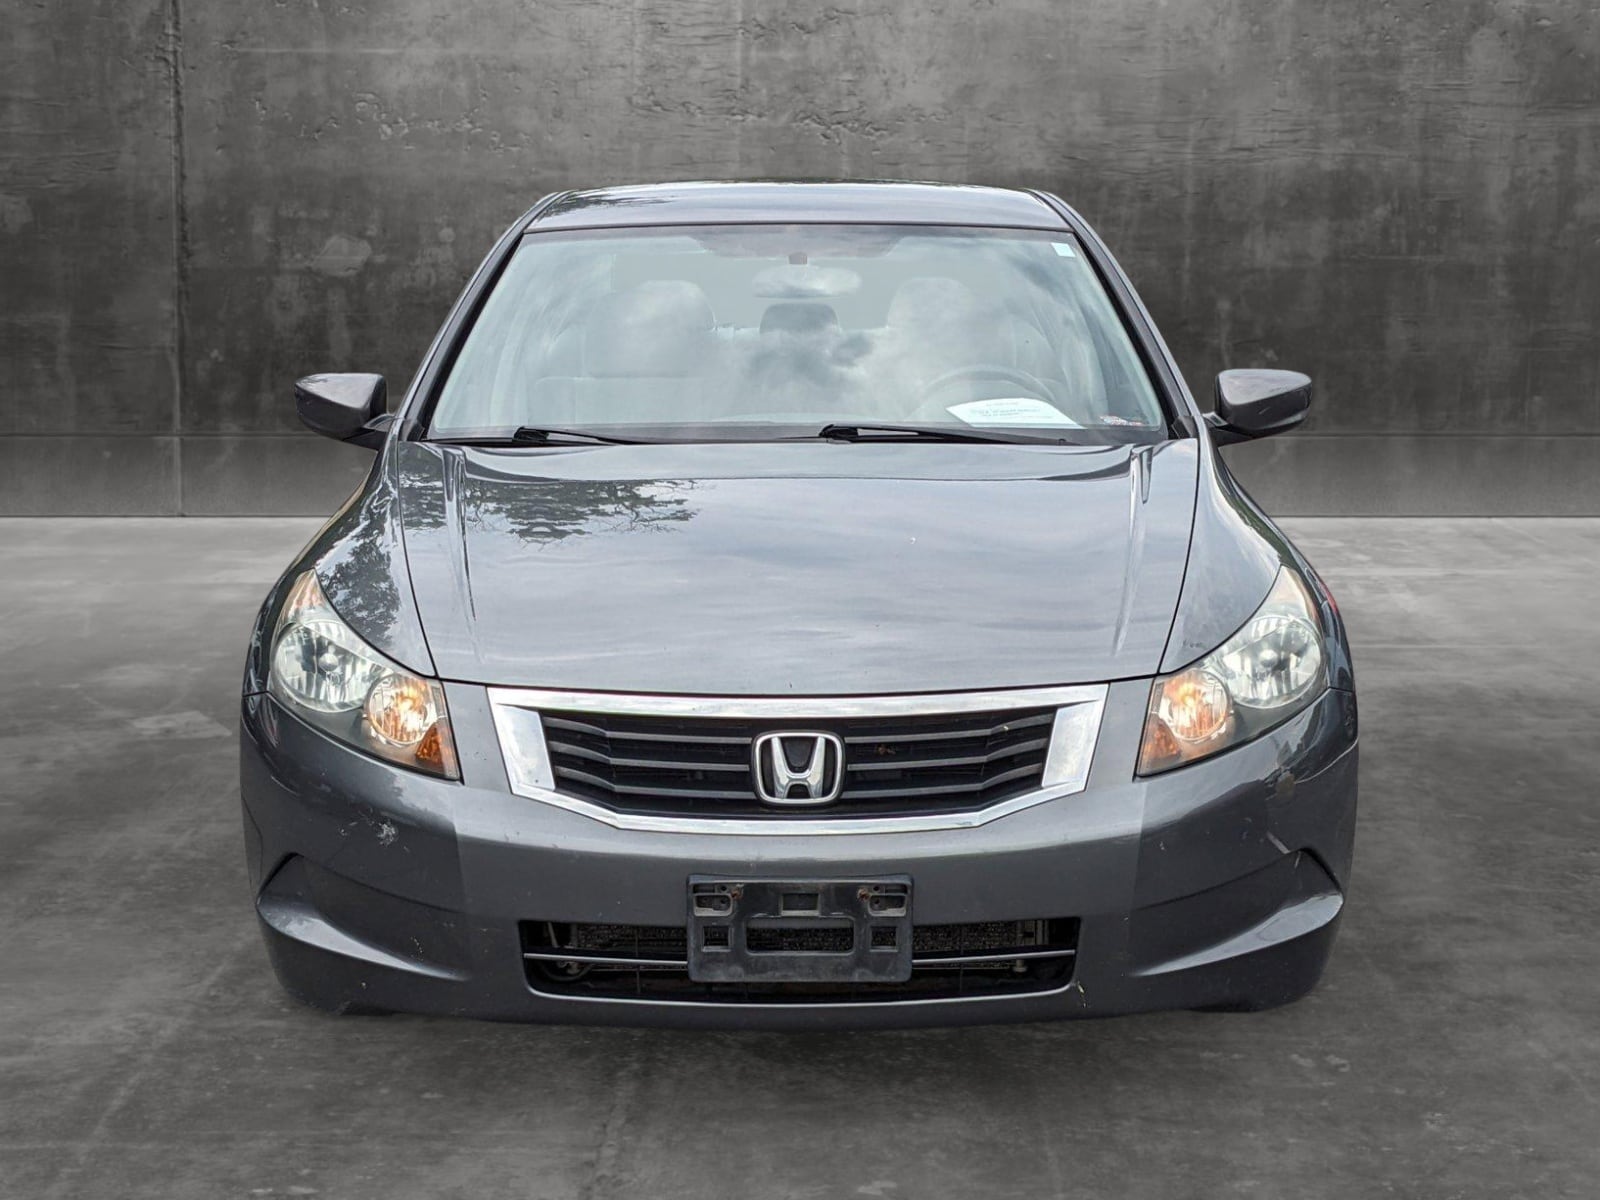 Used 2010 Honda Accord LX-P with VIN 1HGCP2F46AA161254 for sale in Des Plaines, IL